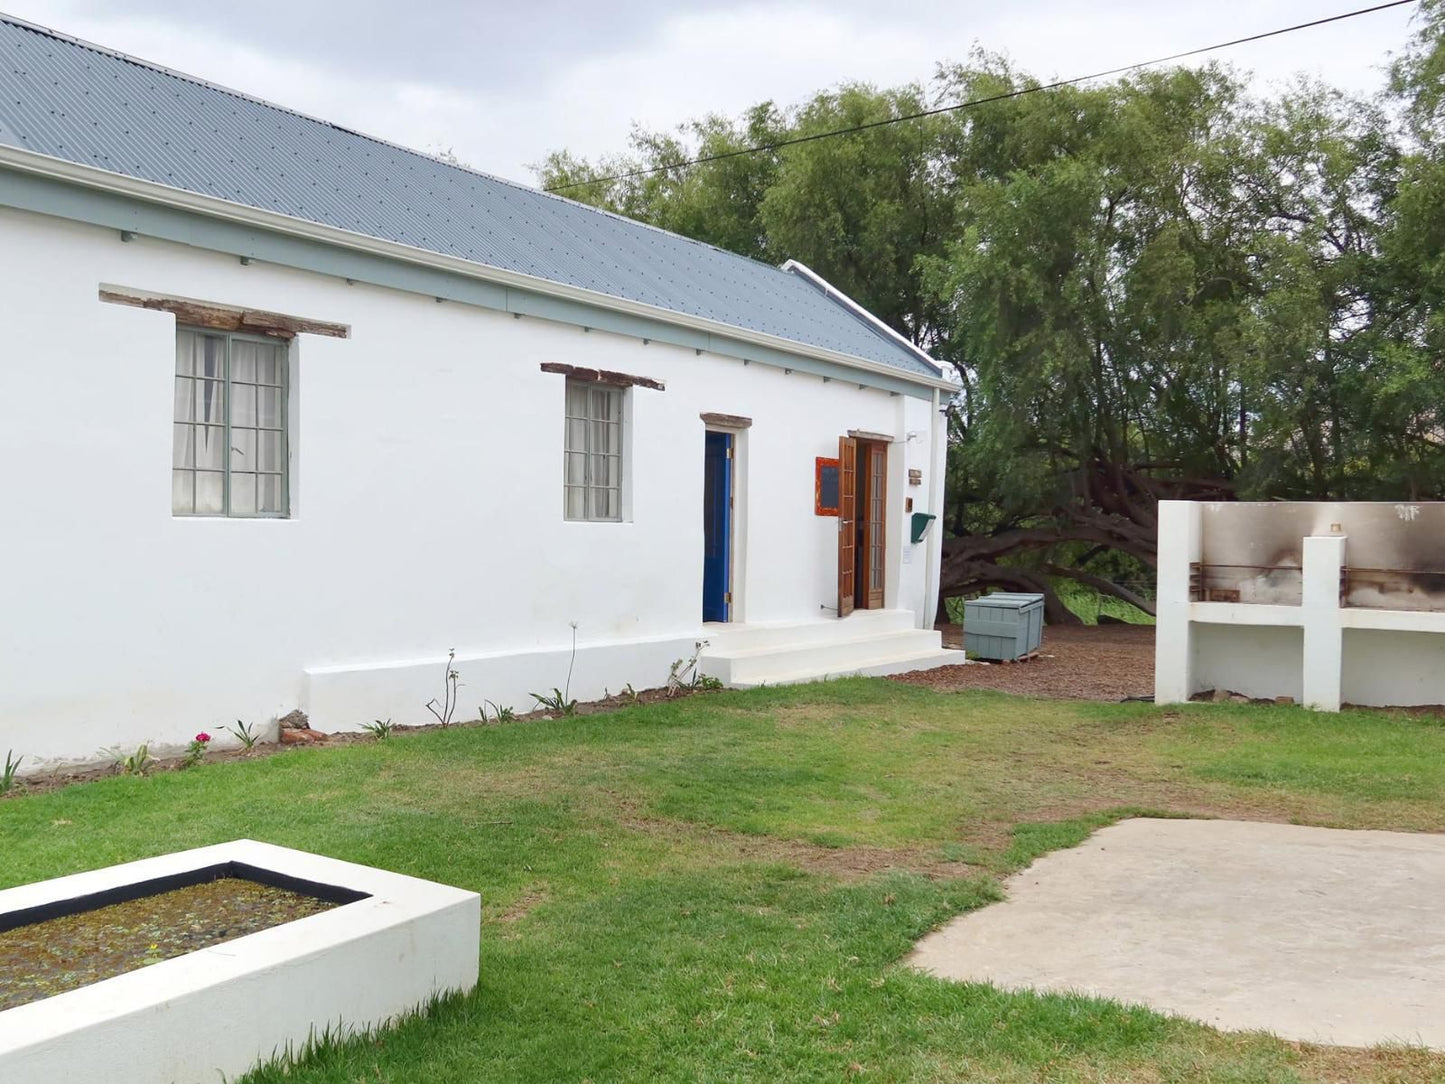 De Bos Backpackersand Camping Montagu Western Cape South Africa House, Building, Architecture